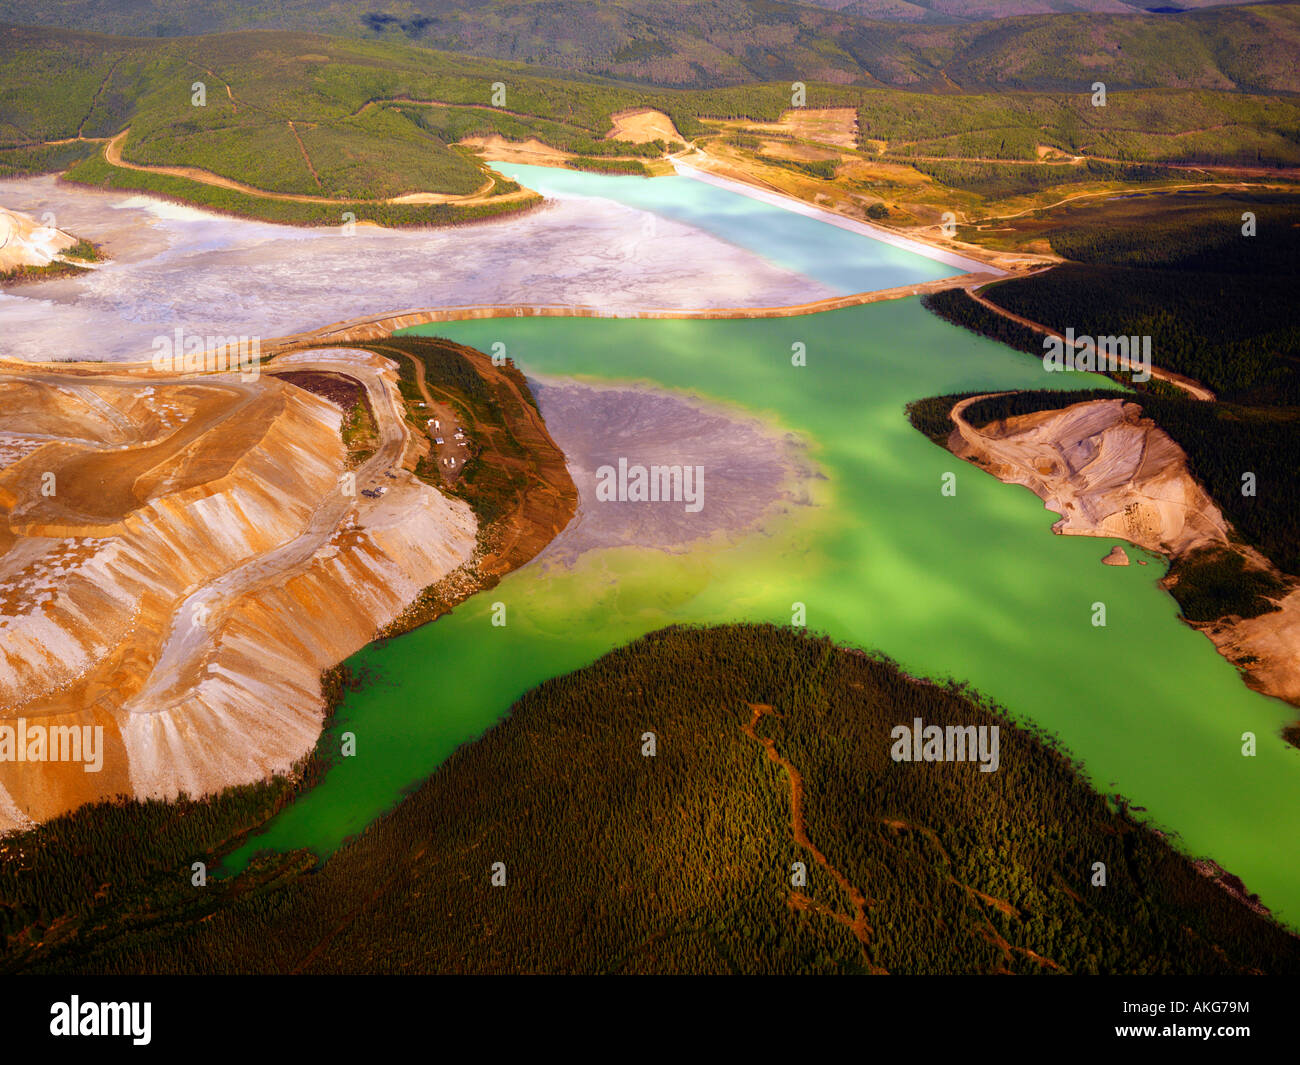 The open pit gold mining operation of Fort Knox Gold Mine just north of Fairbanks Alaska Stock Photo